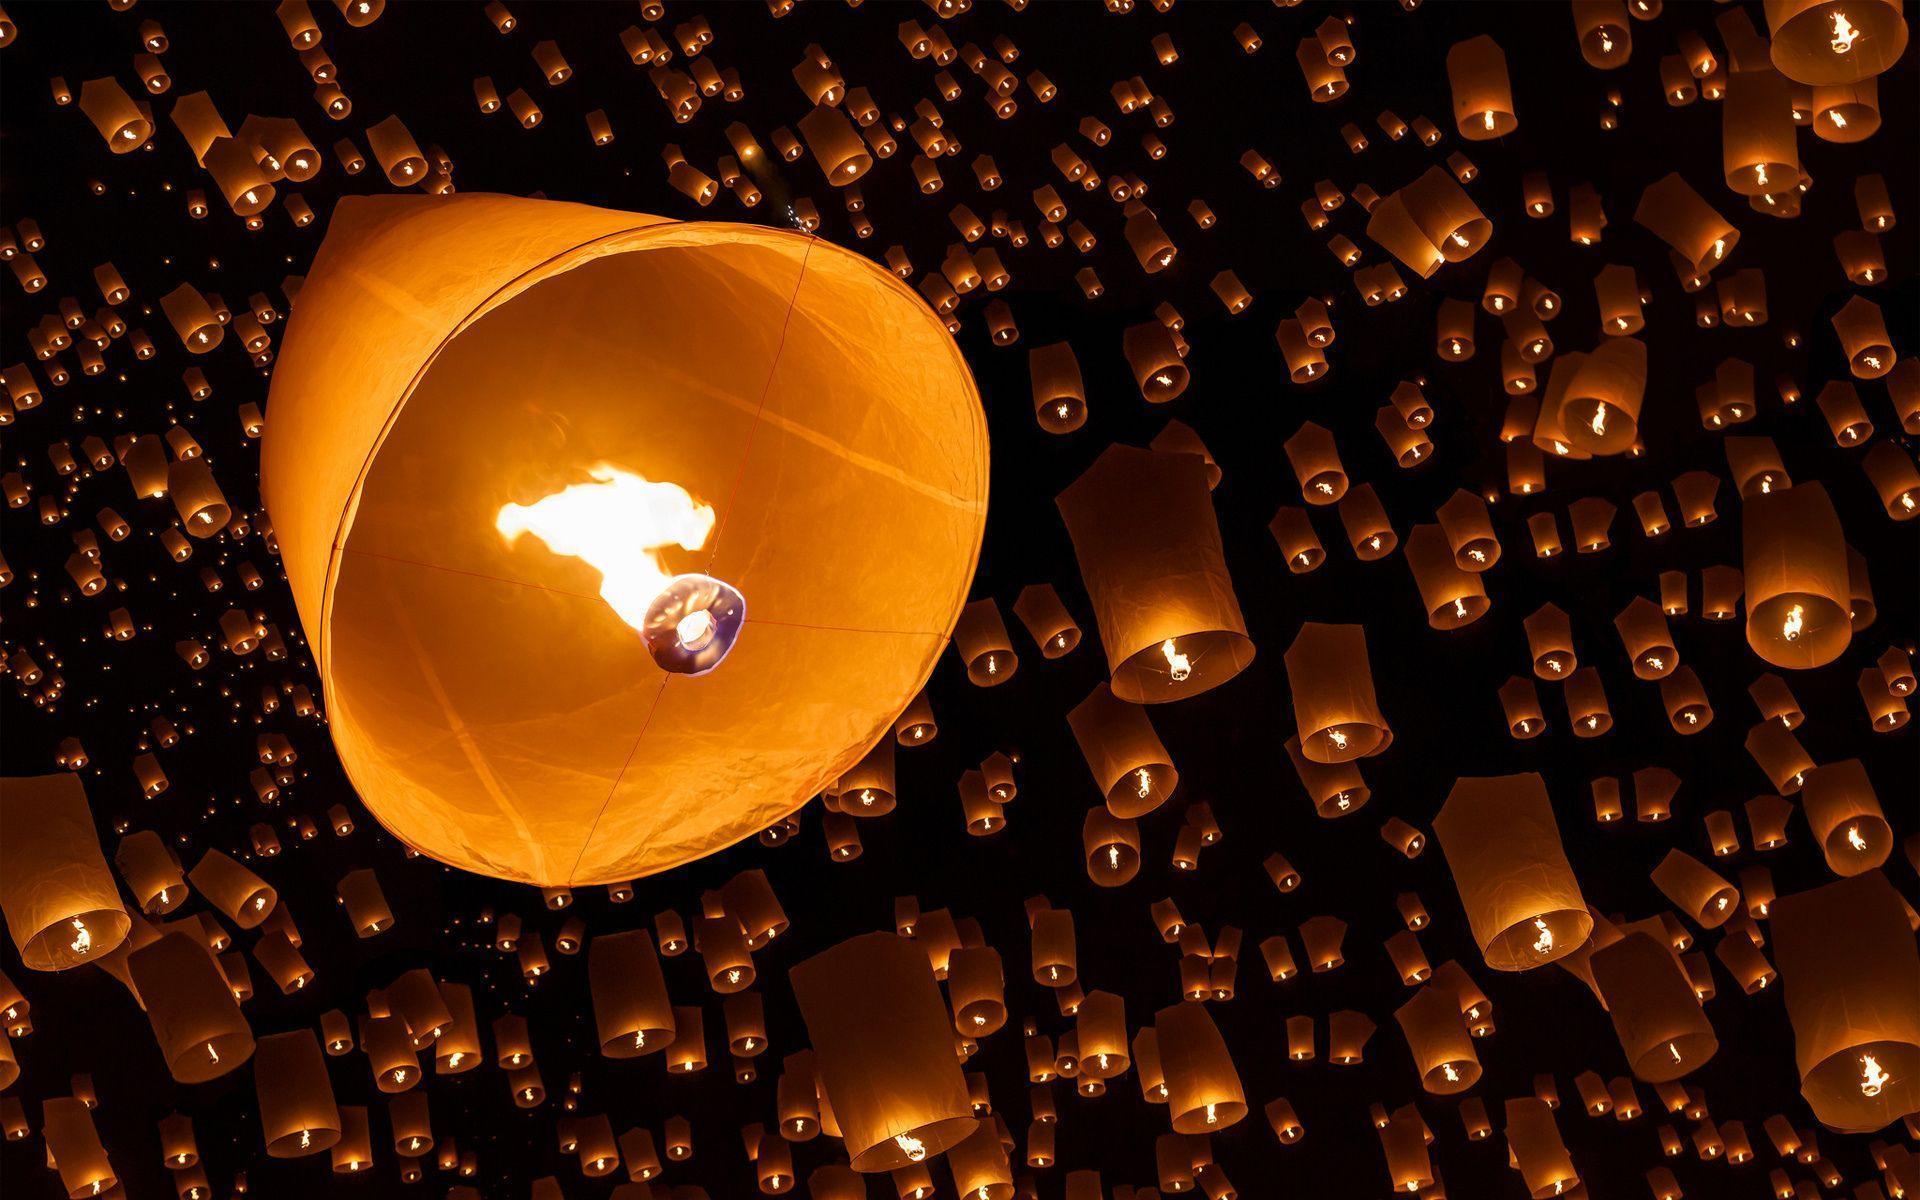 Candle HD Wallpaper